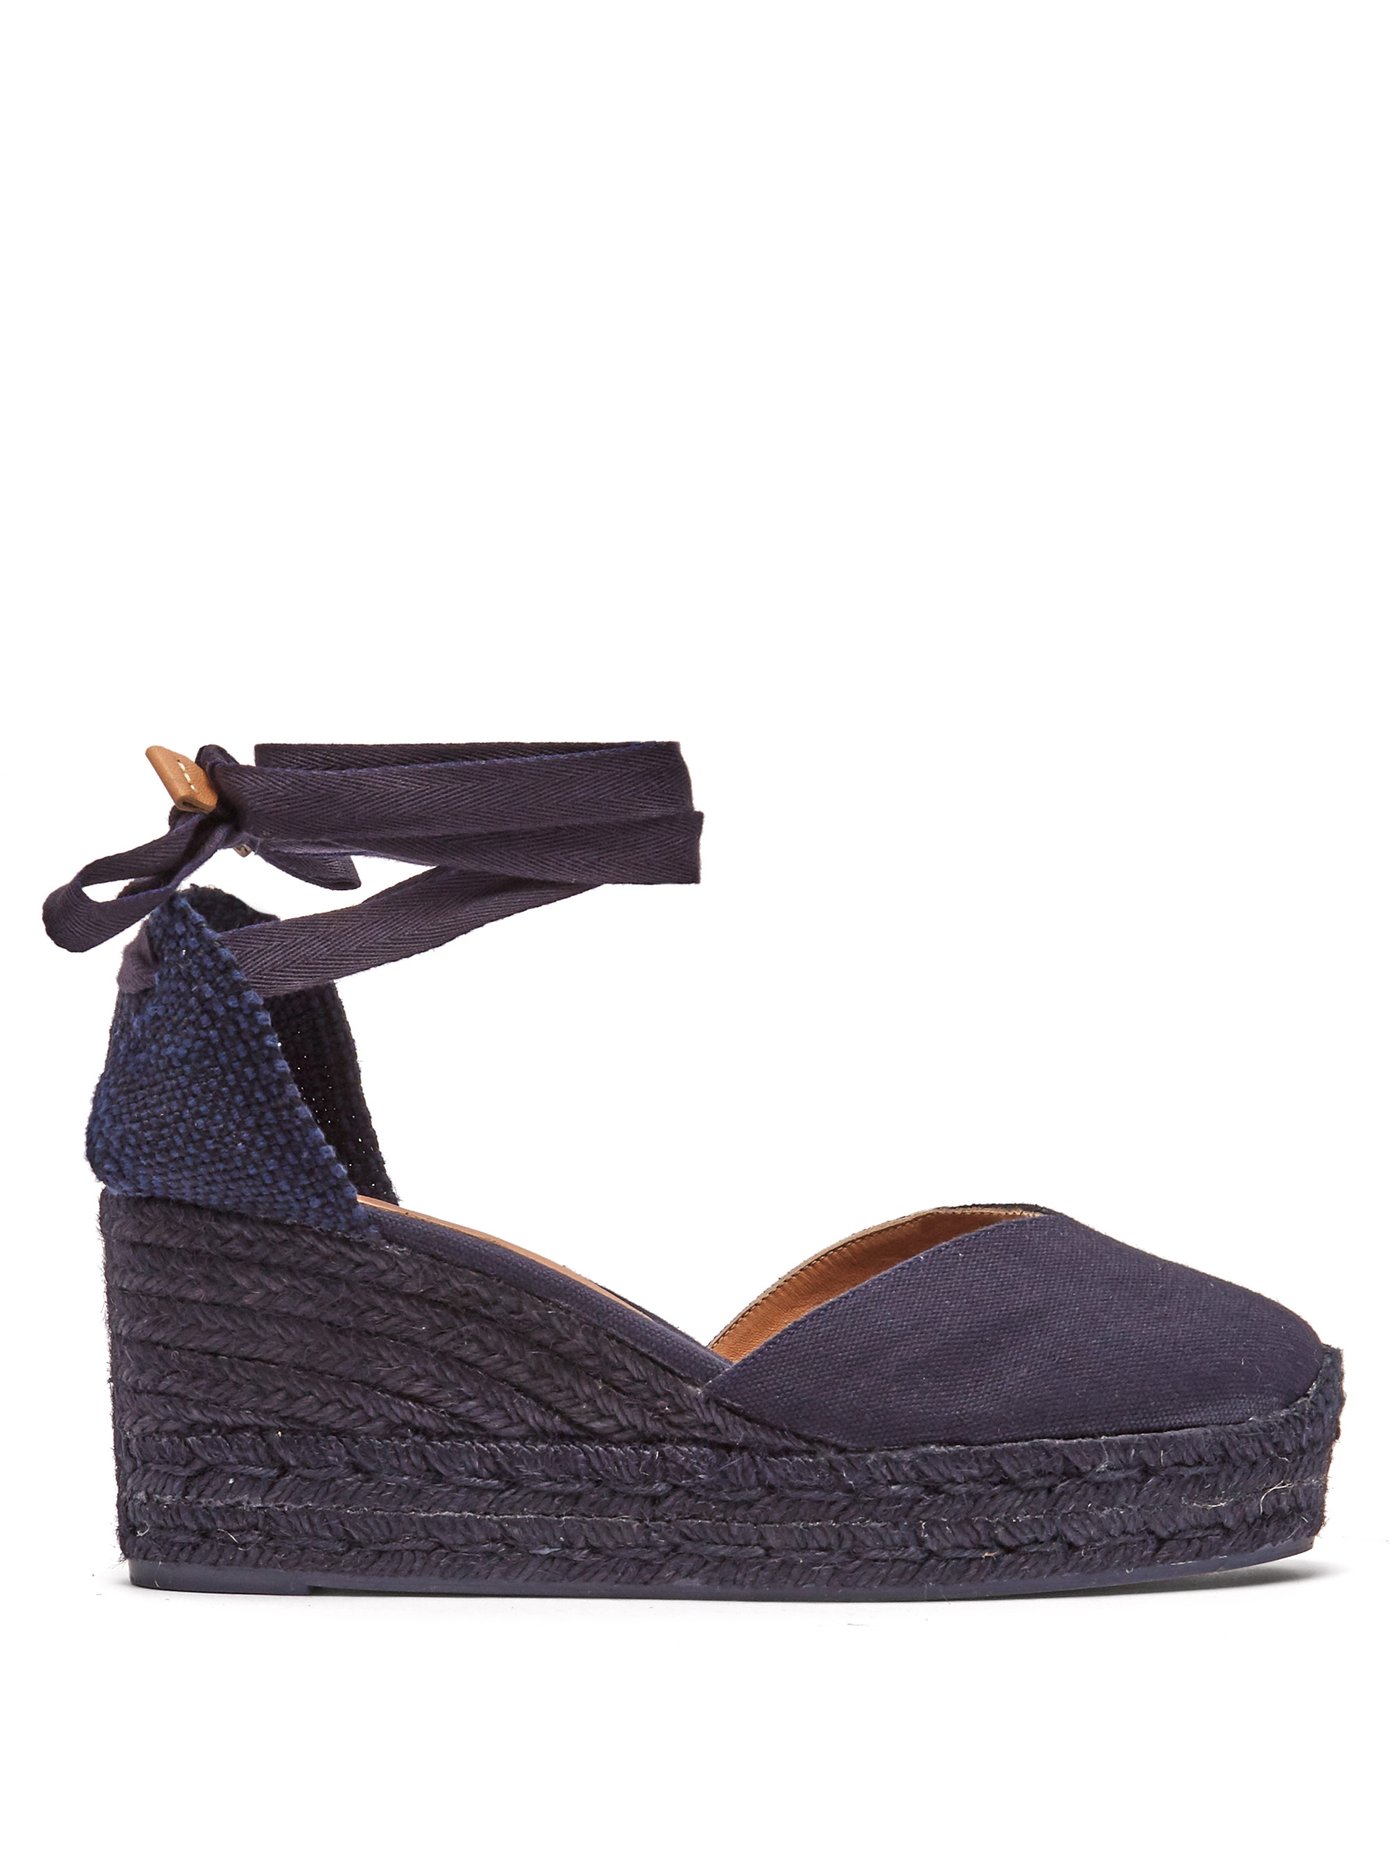 wedge canvas shoes uk